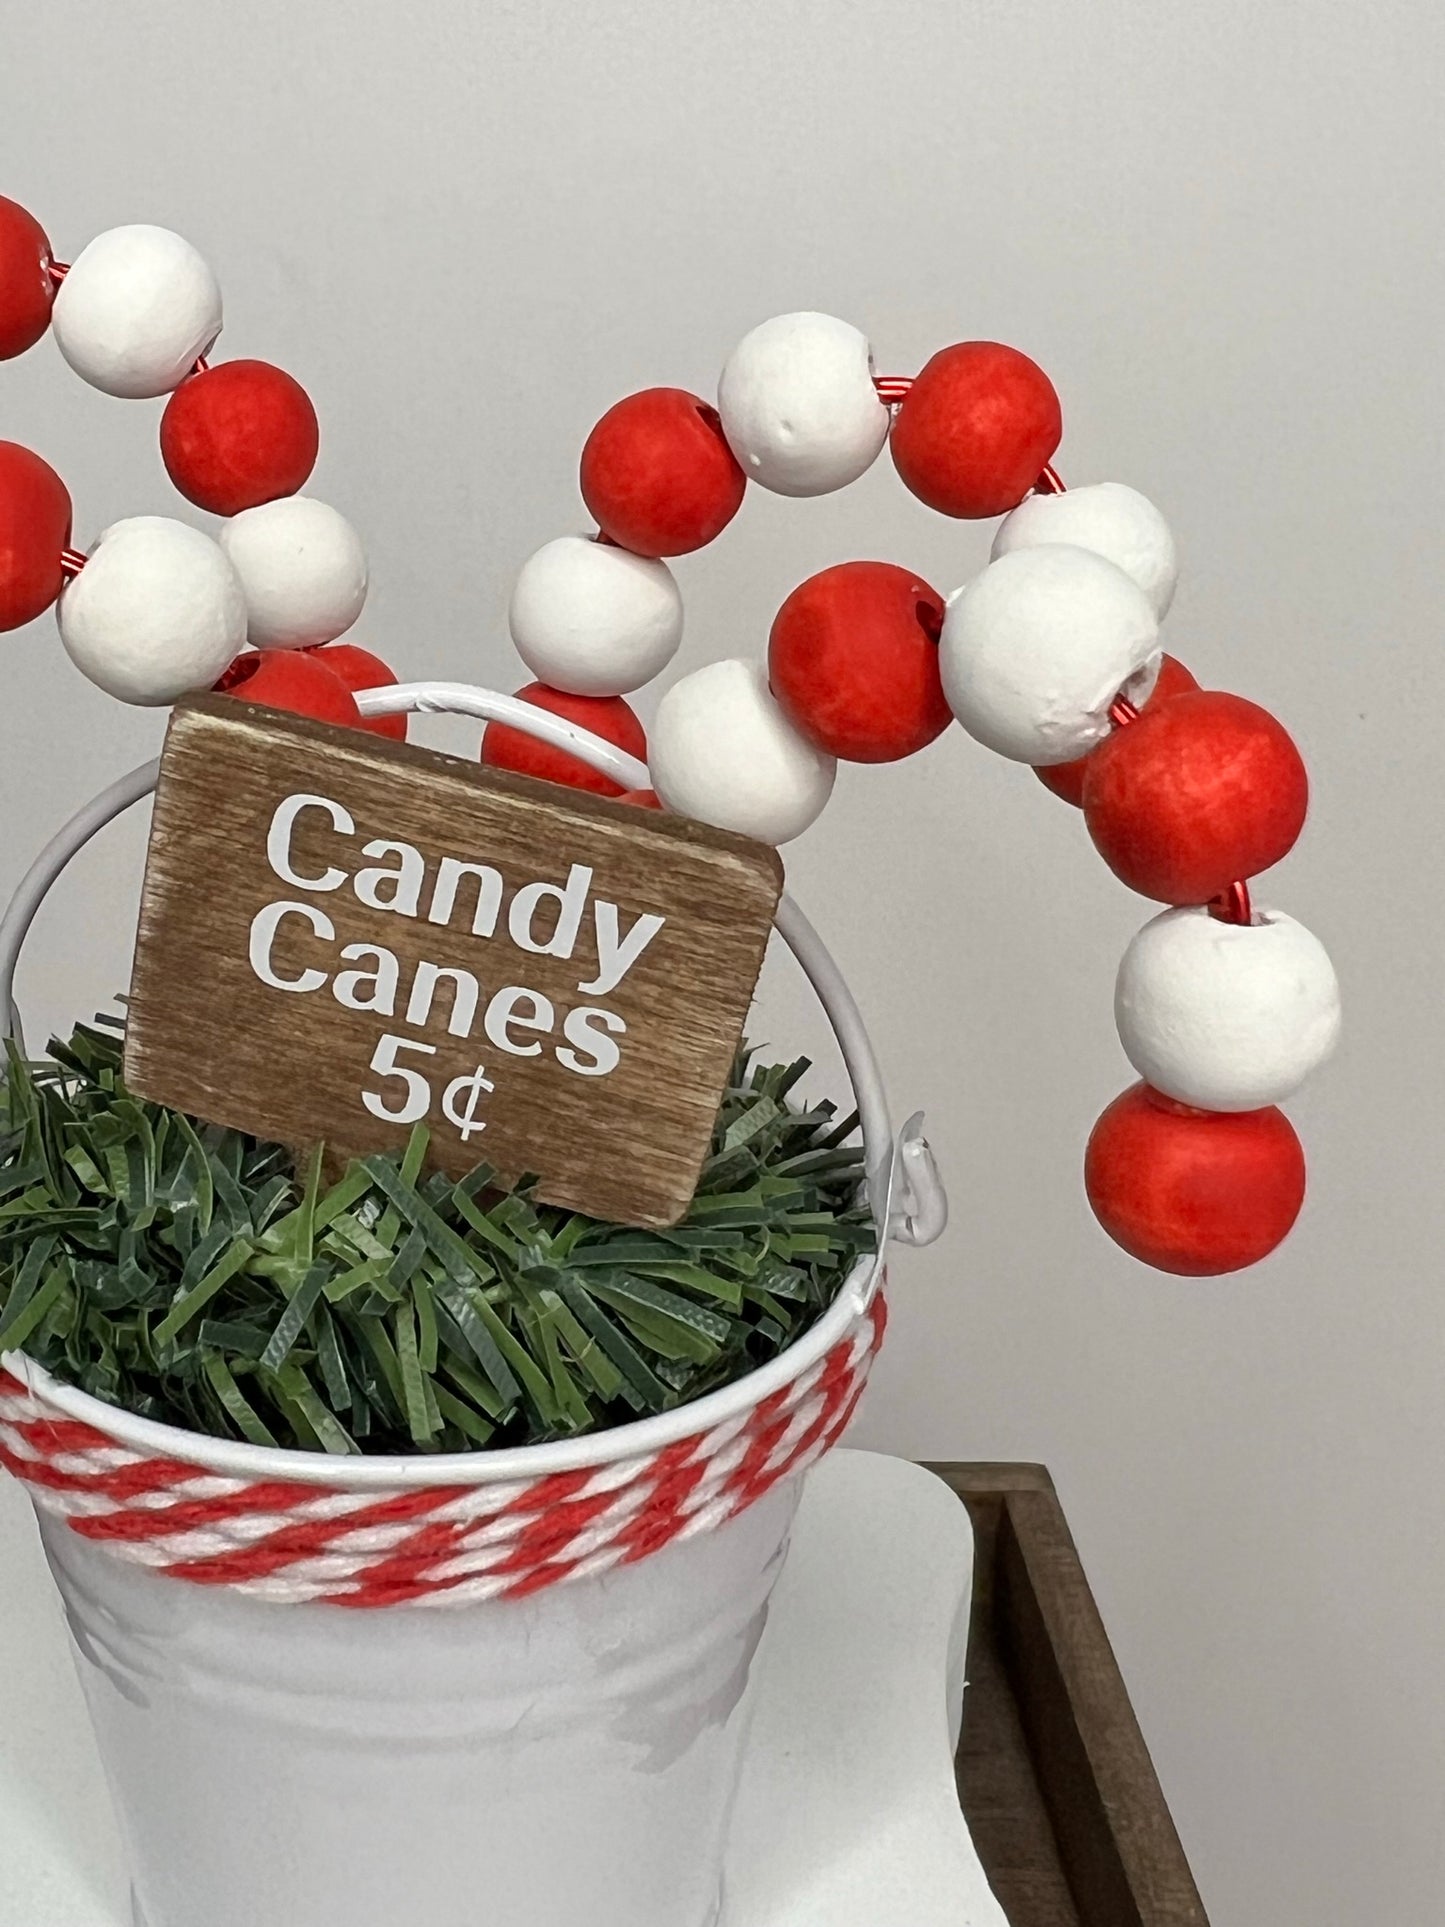 Candy Cane Bucket